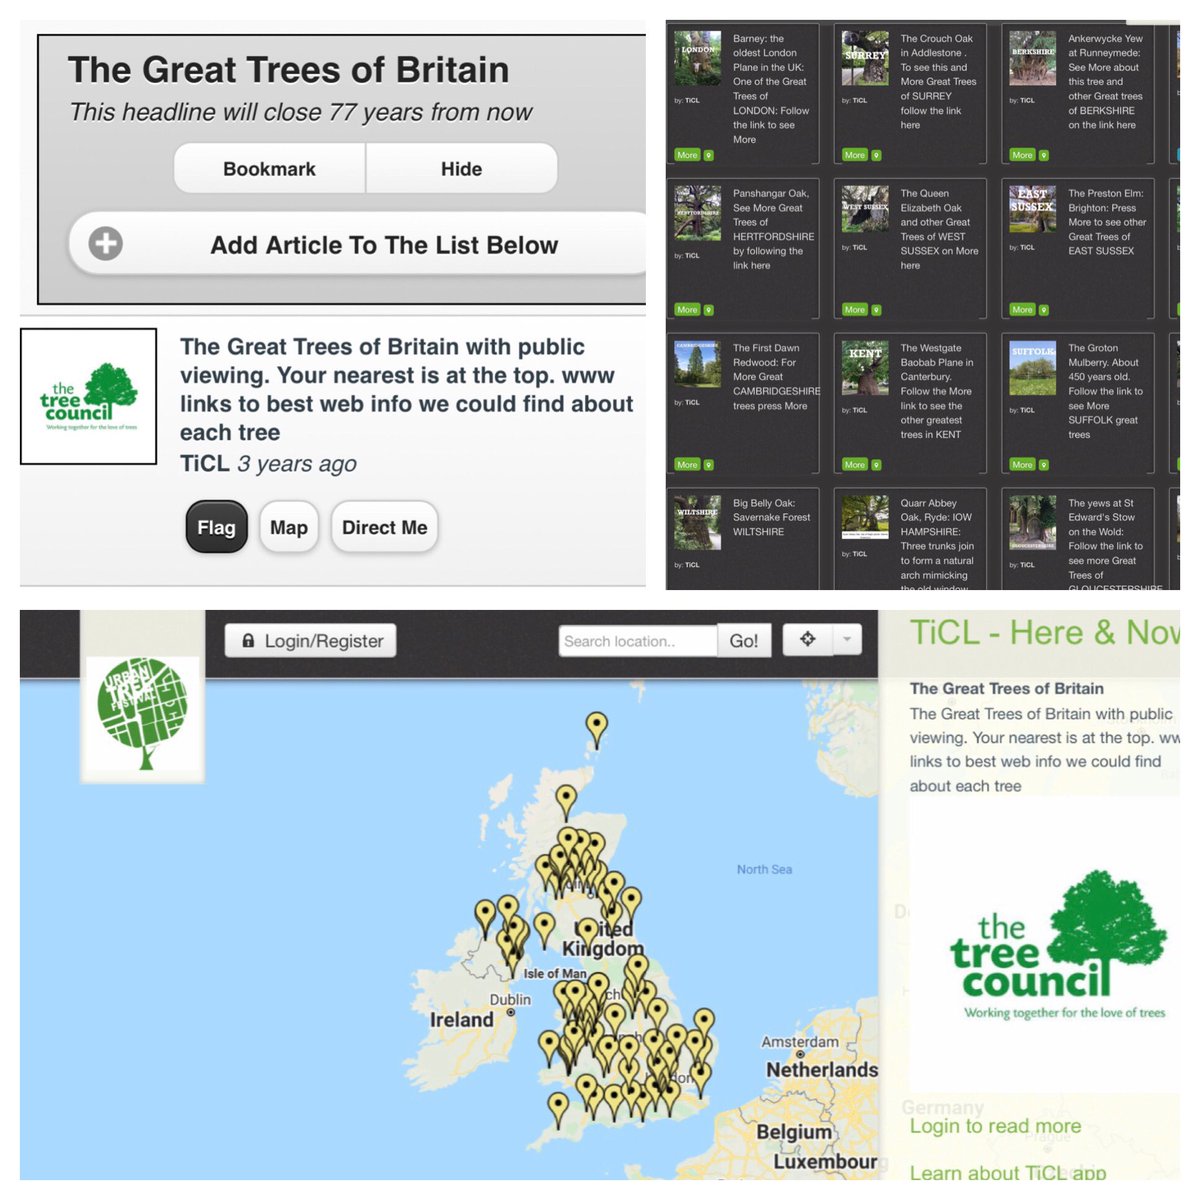 Think about this as #AroundtheUKin100Trees I’m making a FREE list and map 👍🏻 PLEASE SUGGEST TREES YOU THINK WE SHOULD iNCLUDE 🙏 @TheTreeCouncil @WoodlandTrust @nationaltrust @ForestryComm @ArbAssociation @AncientTreesATF @scotforestry @CIFOR_ICRAF @TreeRegister